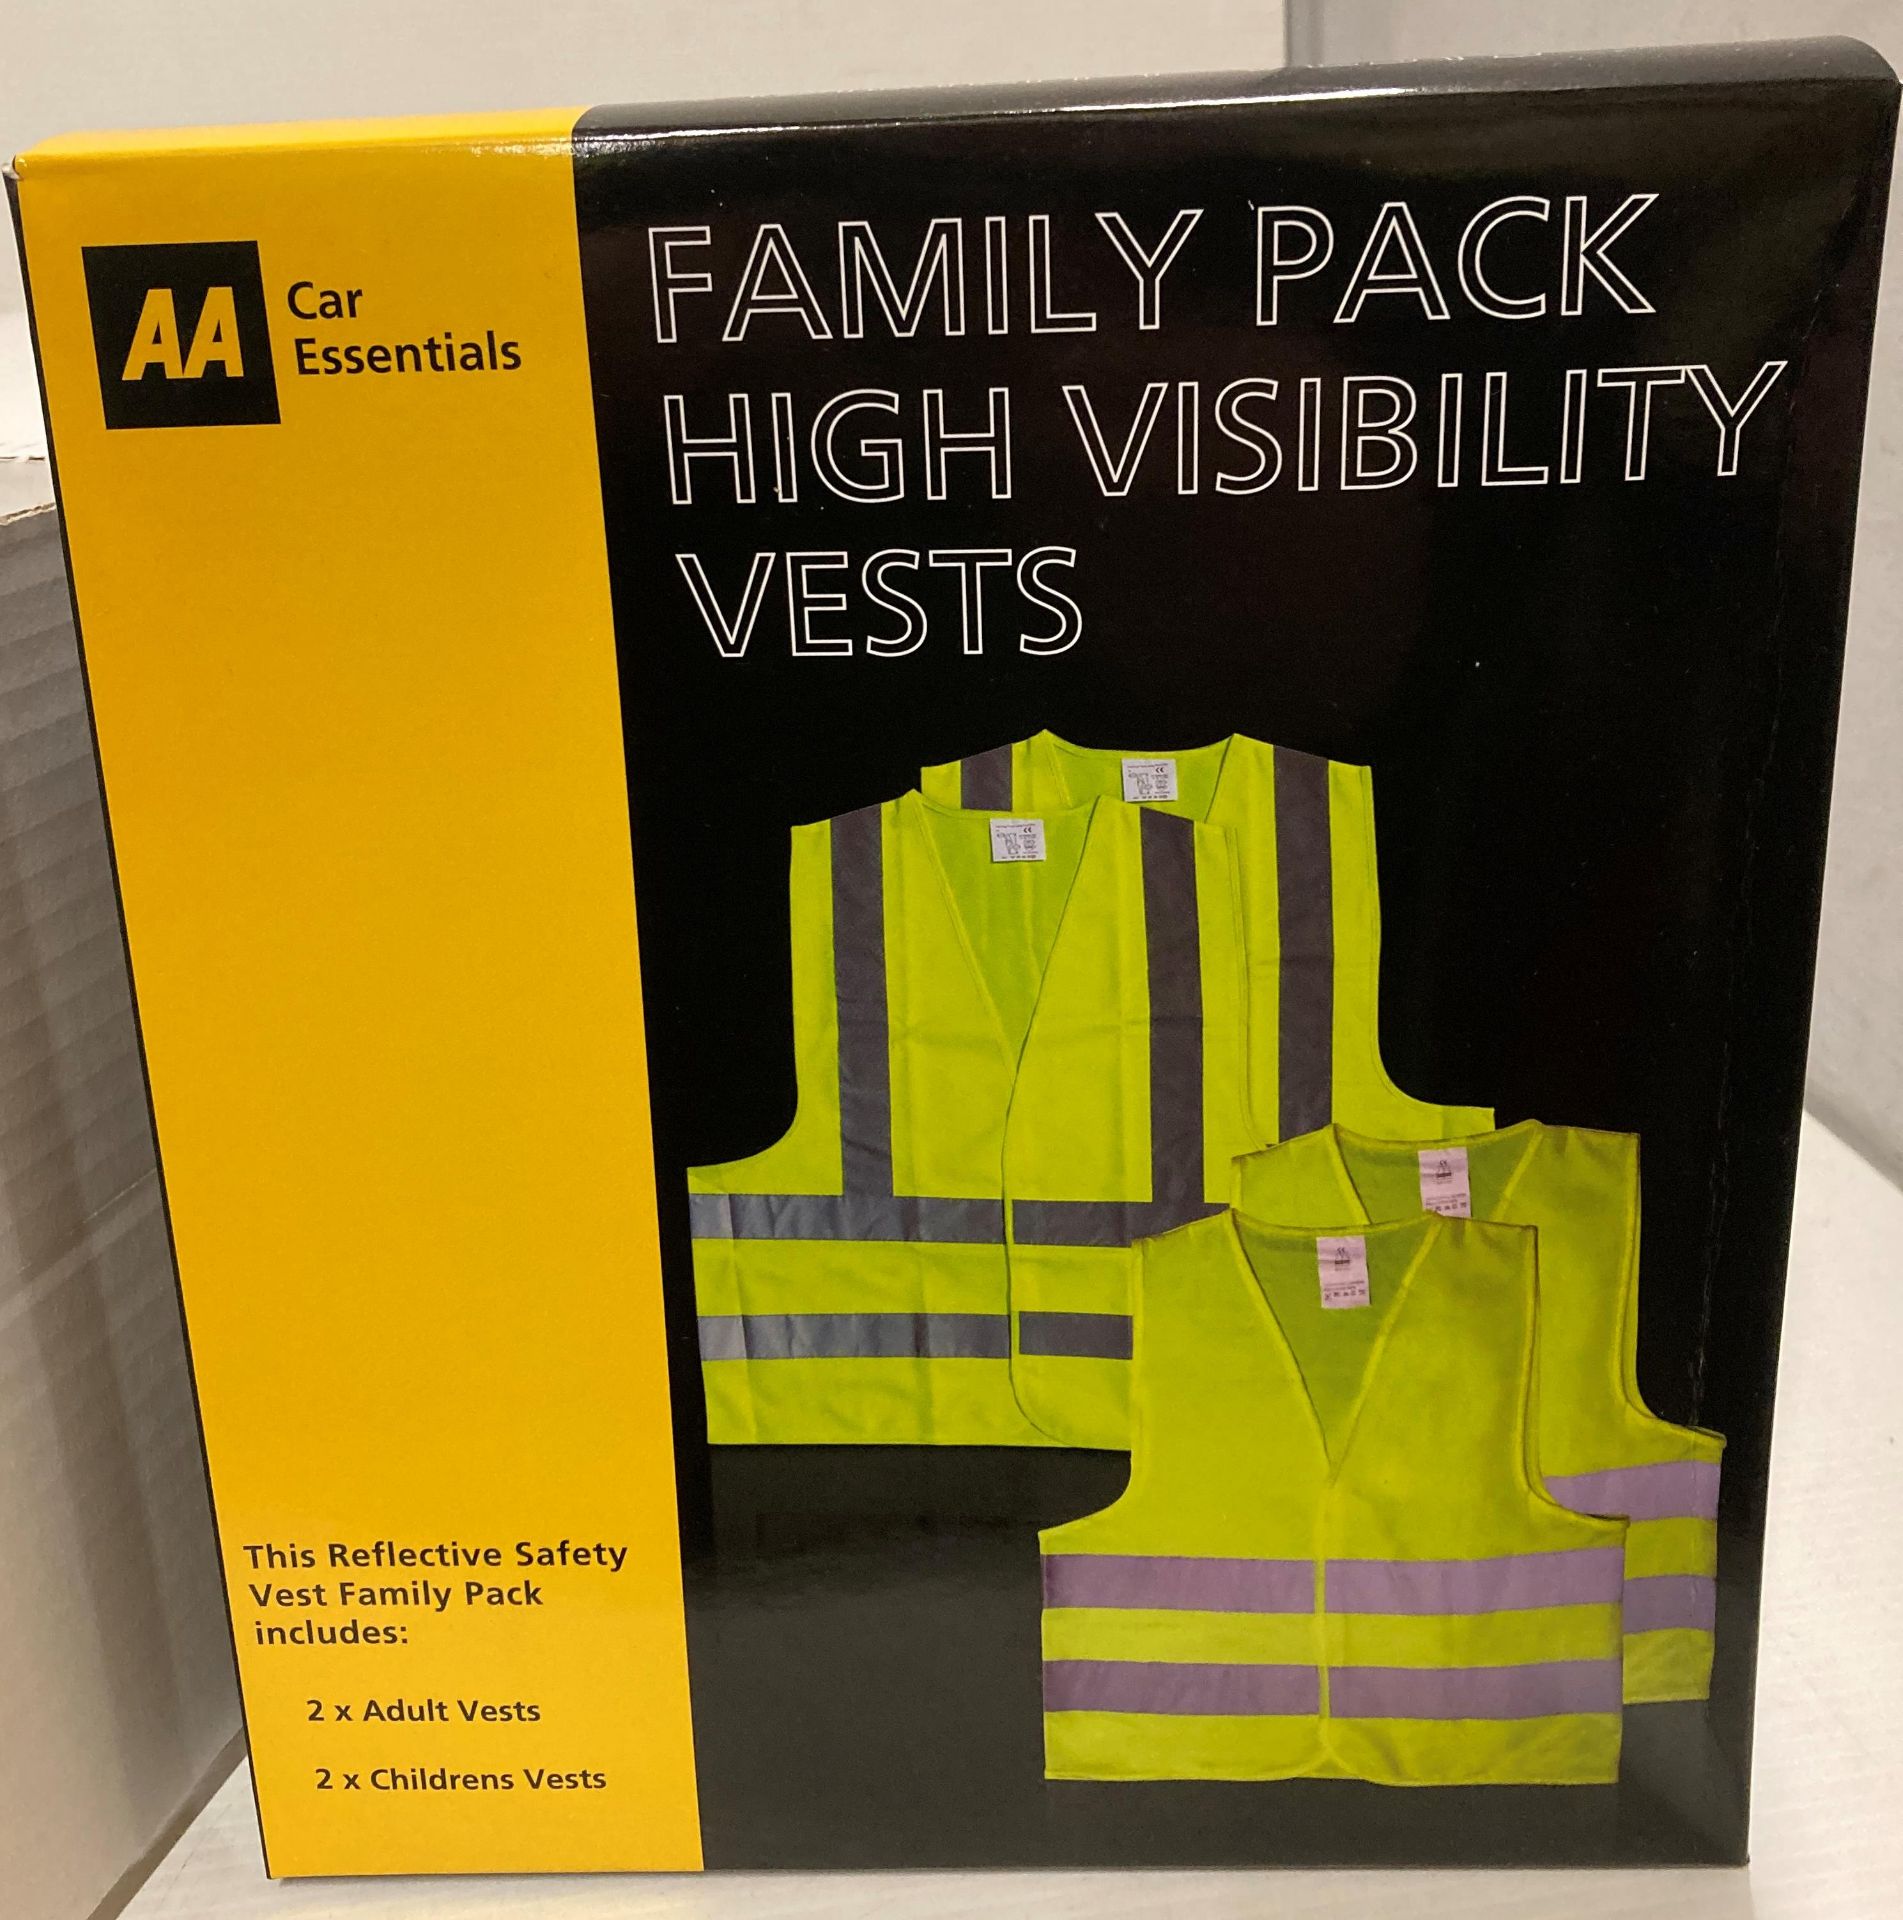 4 packs of AA family pack high visibility vests (1 outer box) (U12)